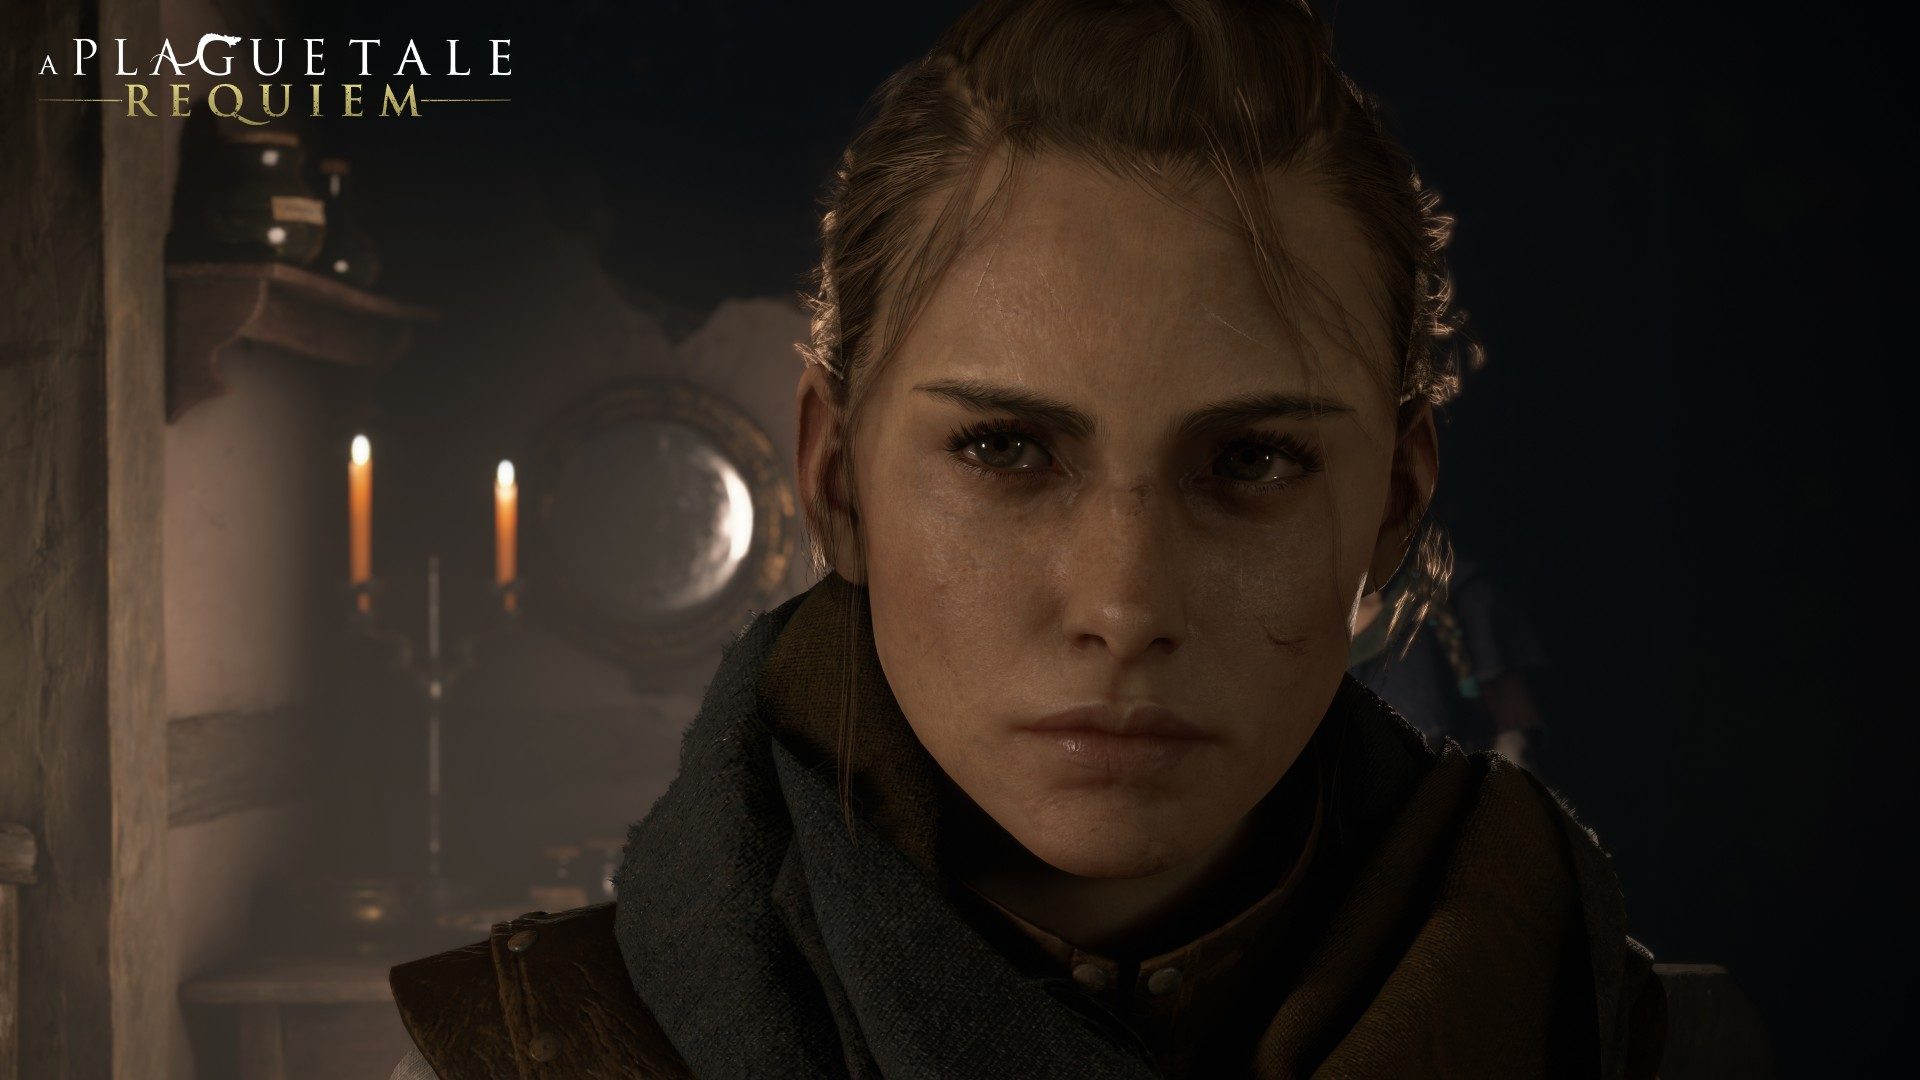 A Plague Tale - Learn more about the making of A Plague